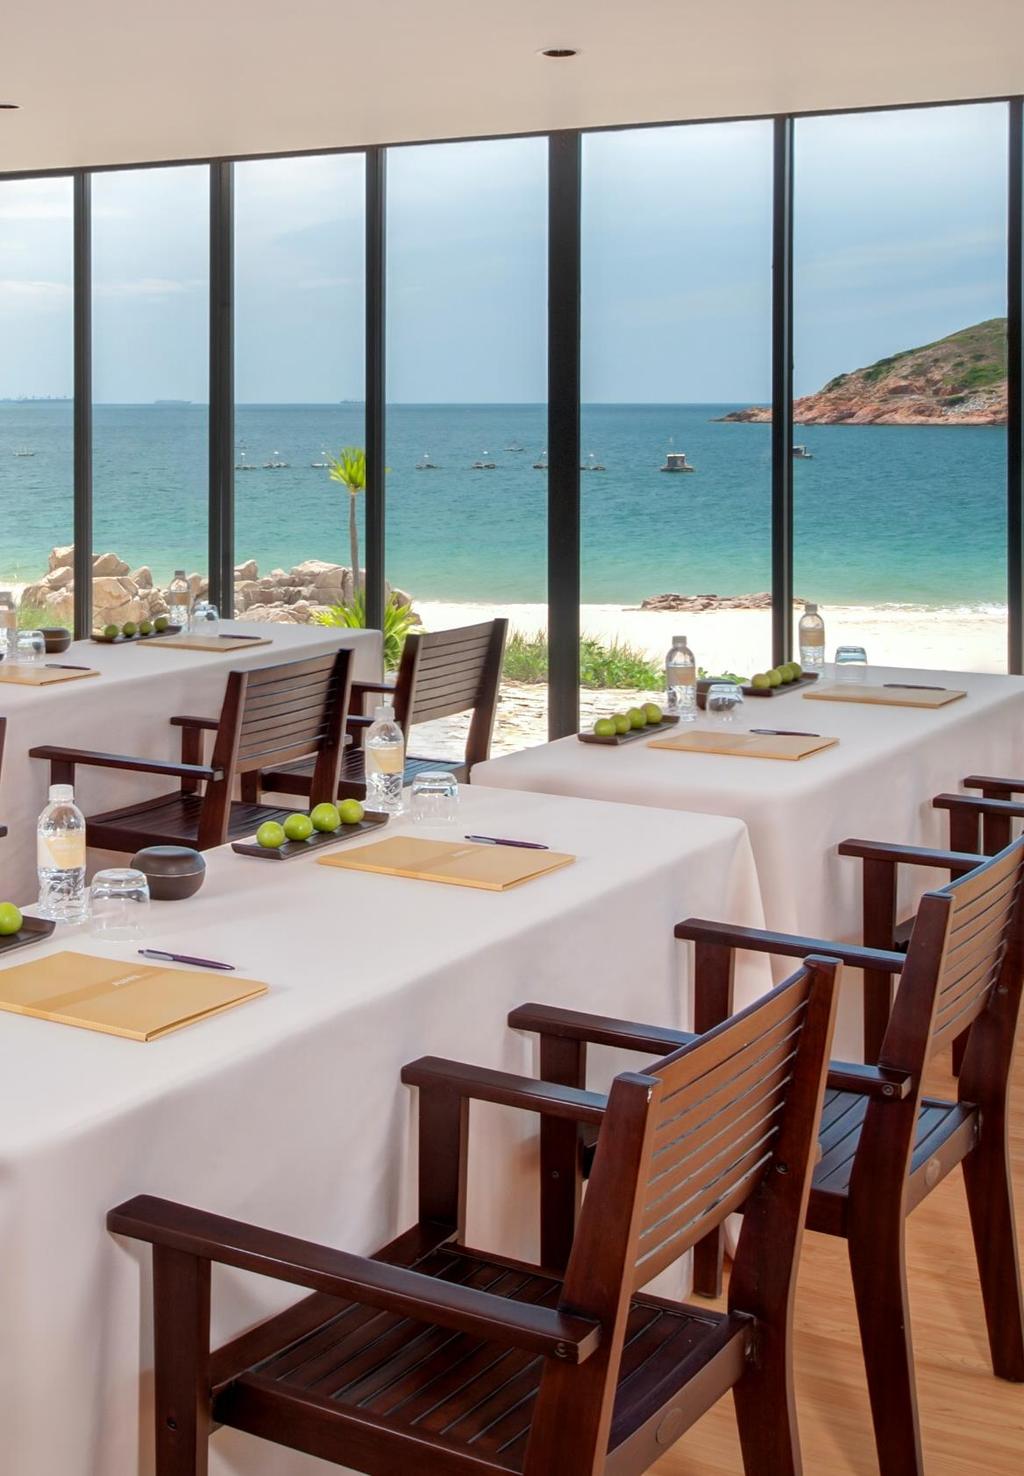 MEET AT AVANI Set on a secluded beach, AVANI Quy Nhon Resort & Spa features a bay view multi-functional meeting and exhibition facility.